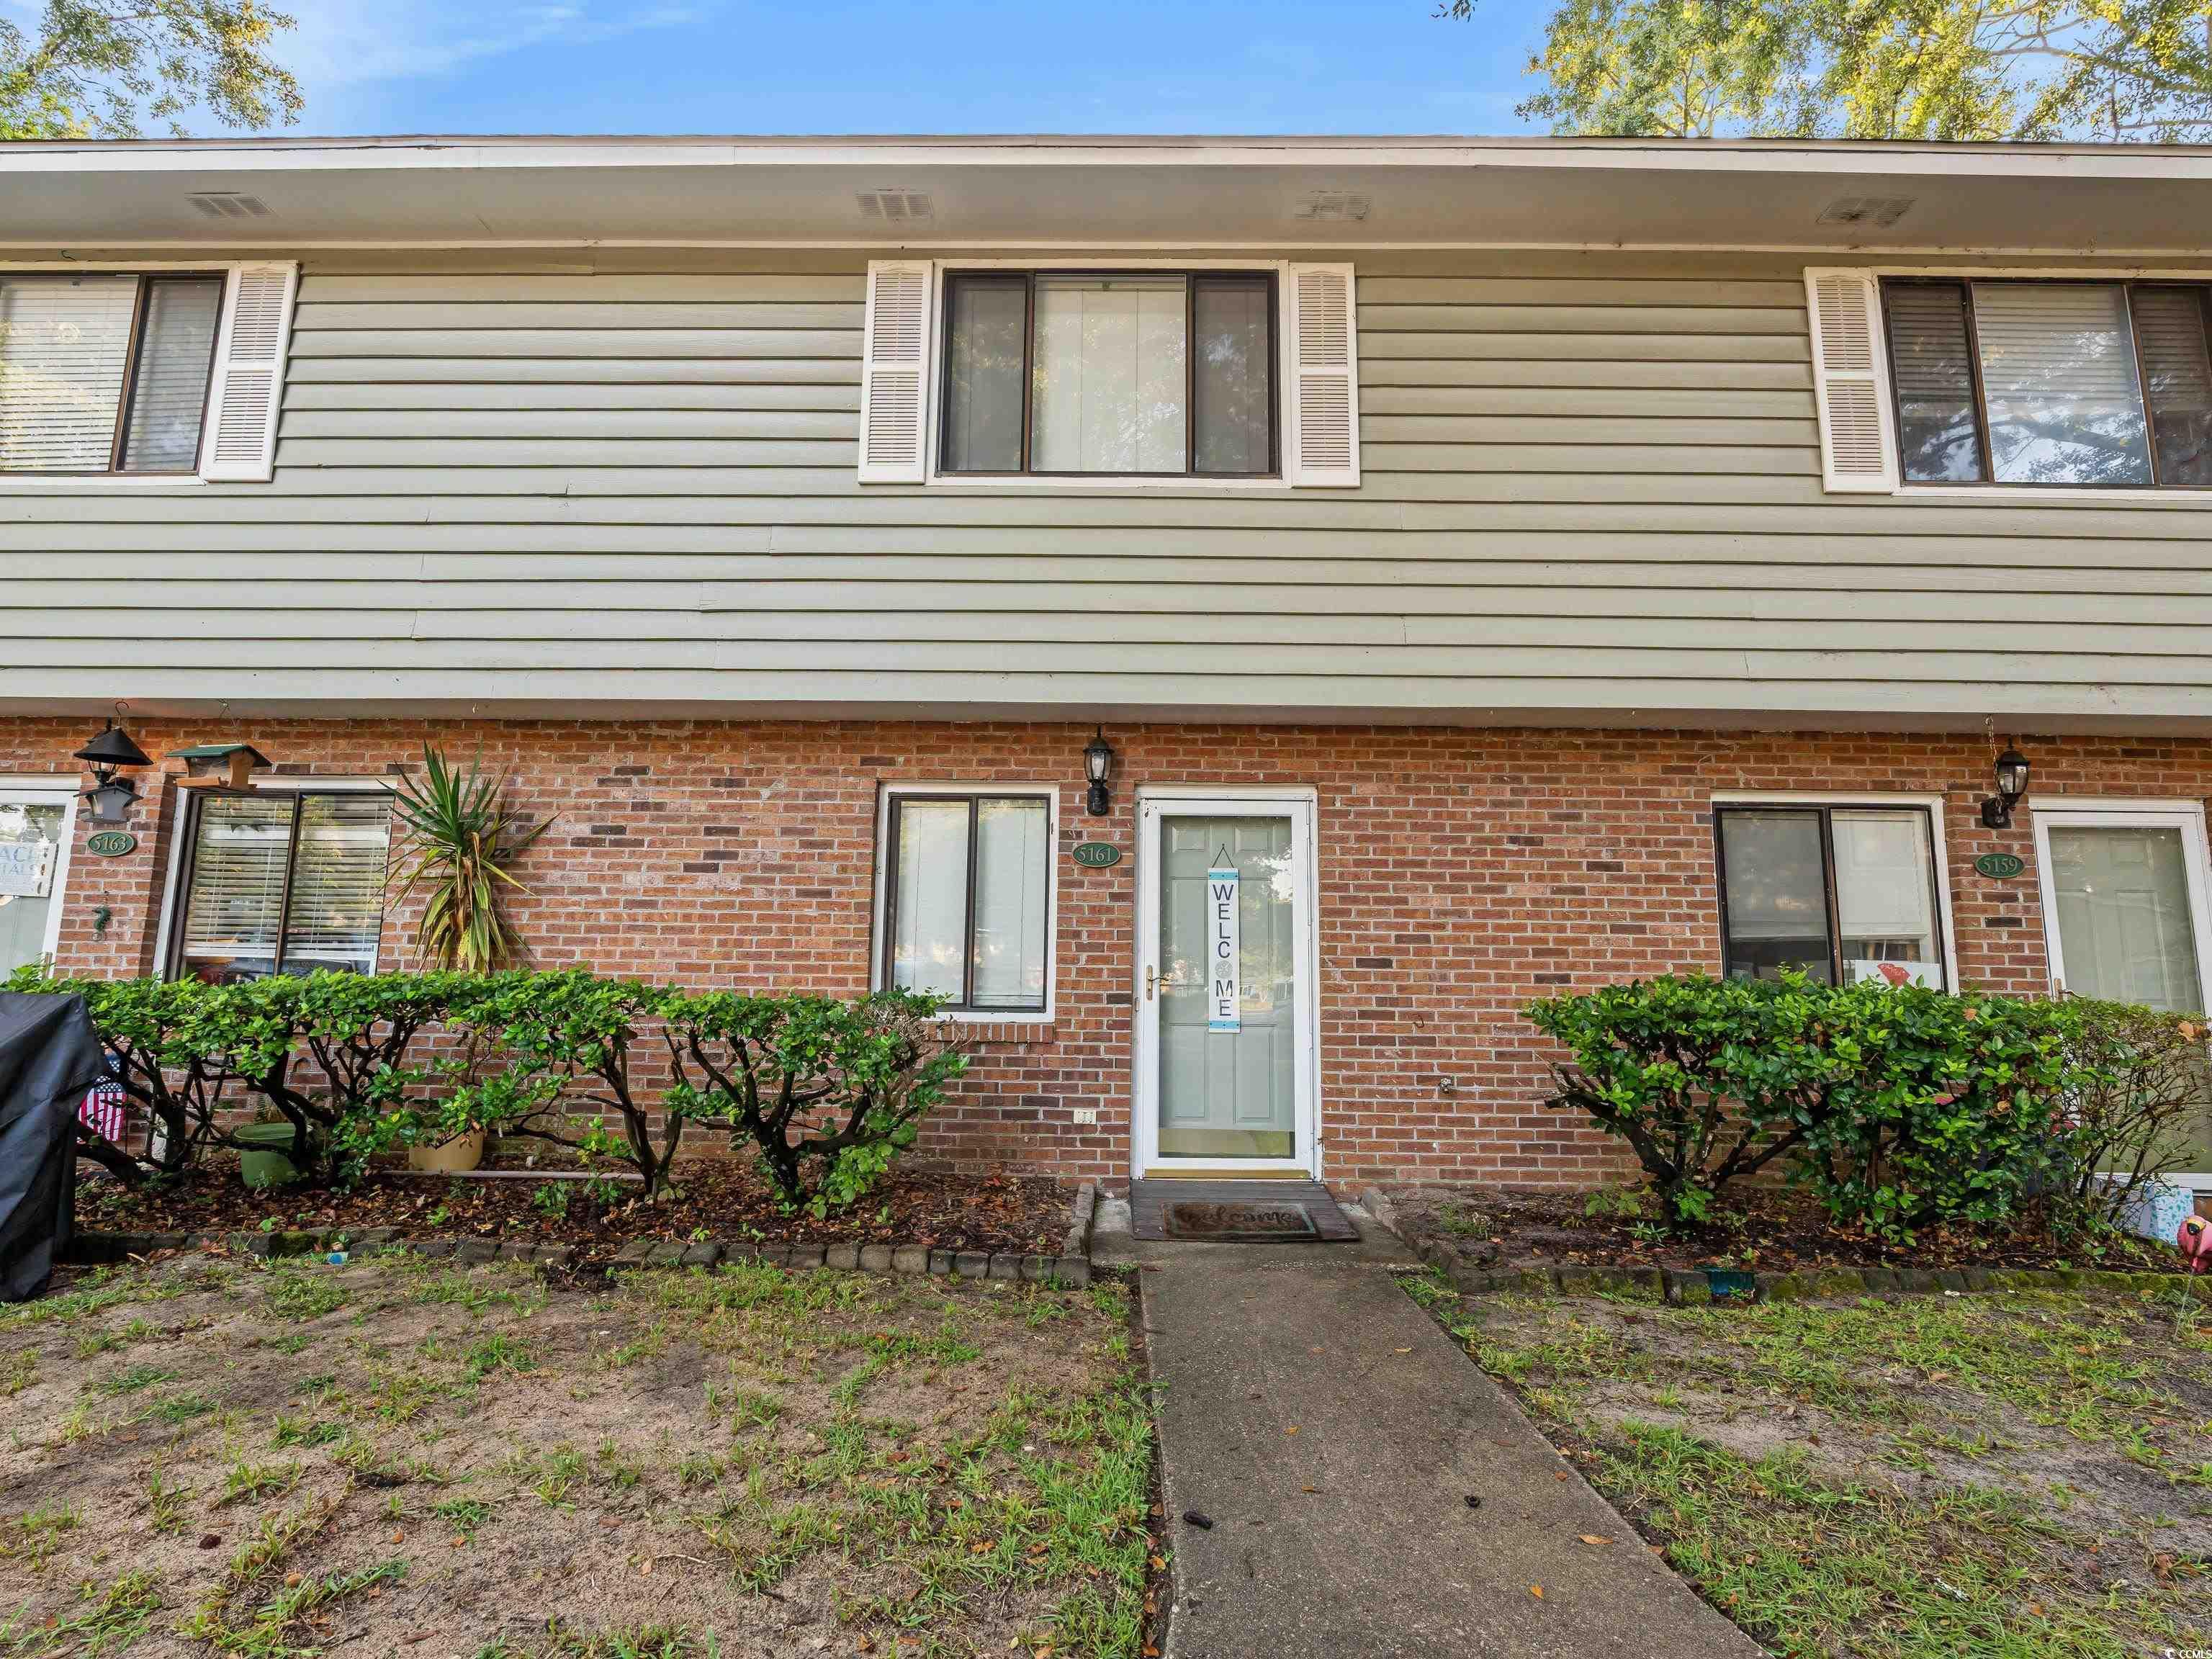 this charming 2 bed ,1.5 bath townhome is nestled in murrells inlet near the atlantic ocean. recently remodeled with brand new lvp floor, new light fixtures ,freshly paint walls you will enjoy enjoy the modern features, enhancing both comfort and style. don't miss out ,schedule your showing today !!!